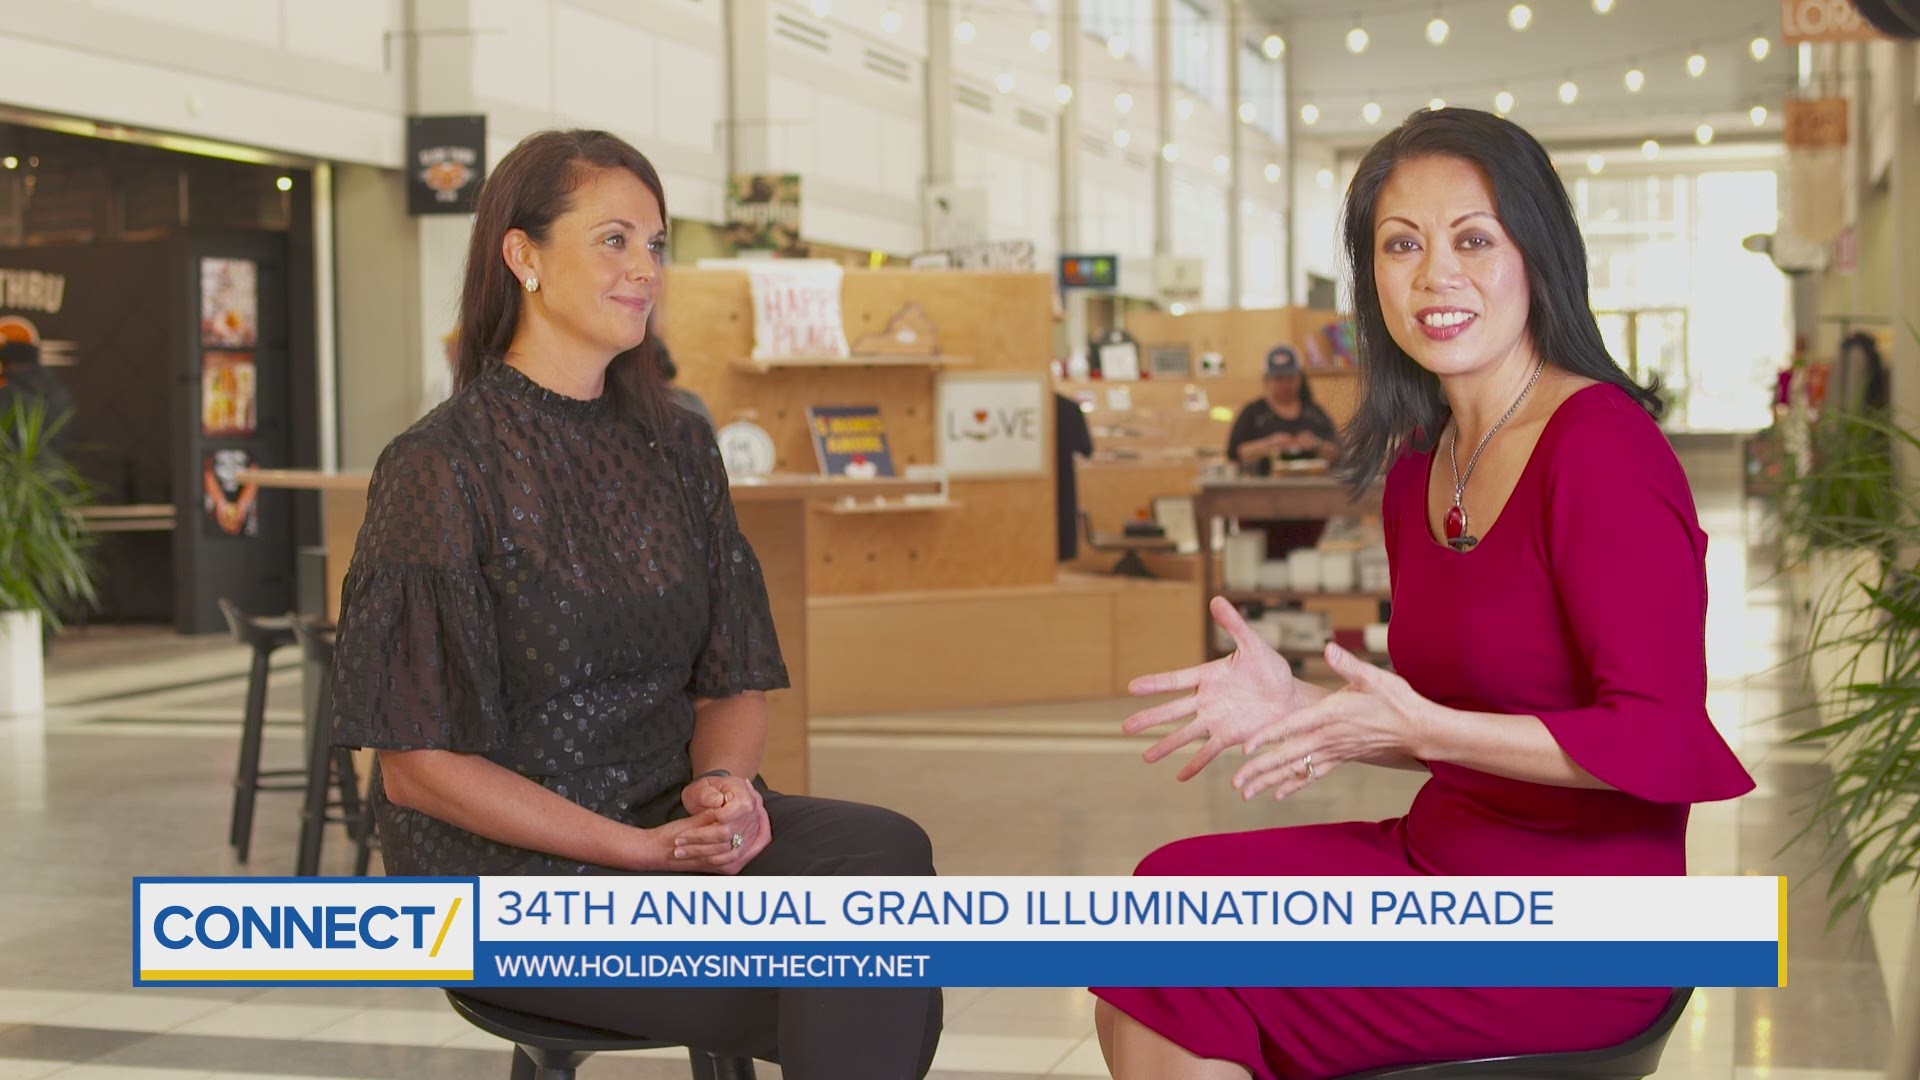 The Grand Illumination Parade lights up the Downtown Norfolk skyline this Saturday, at 7 p.m.! We talked about parking discounts, shopping, and other things to do during the event.